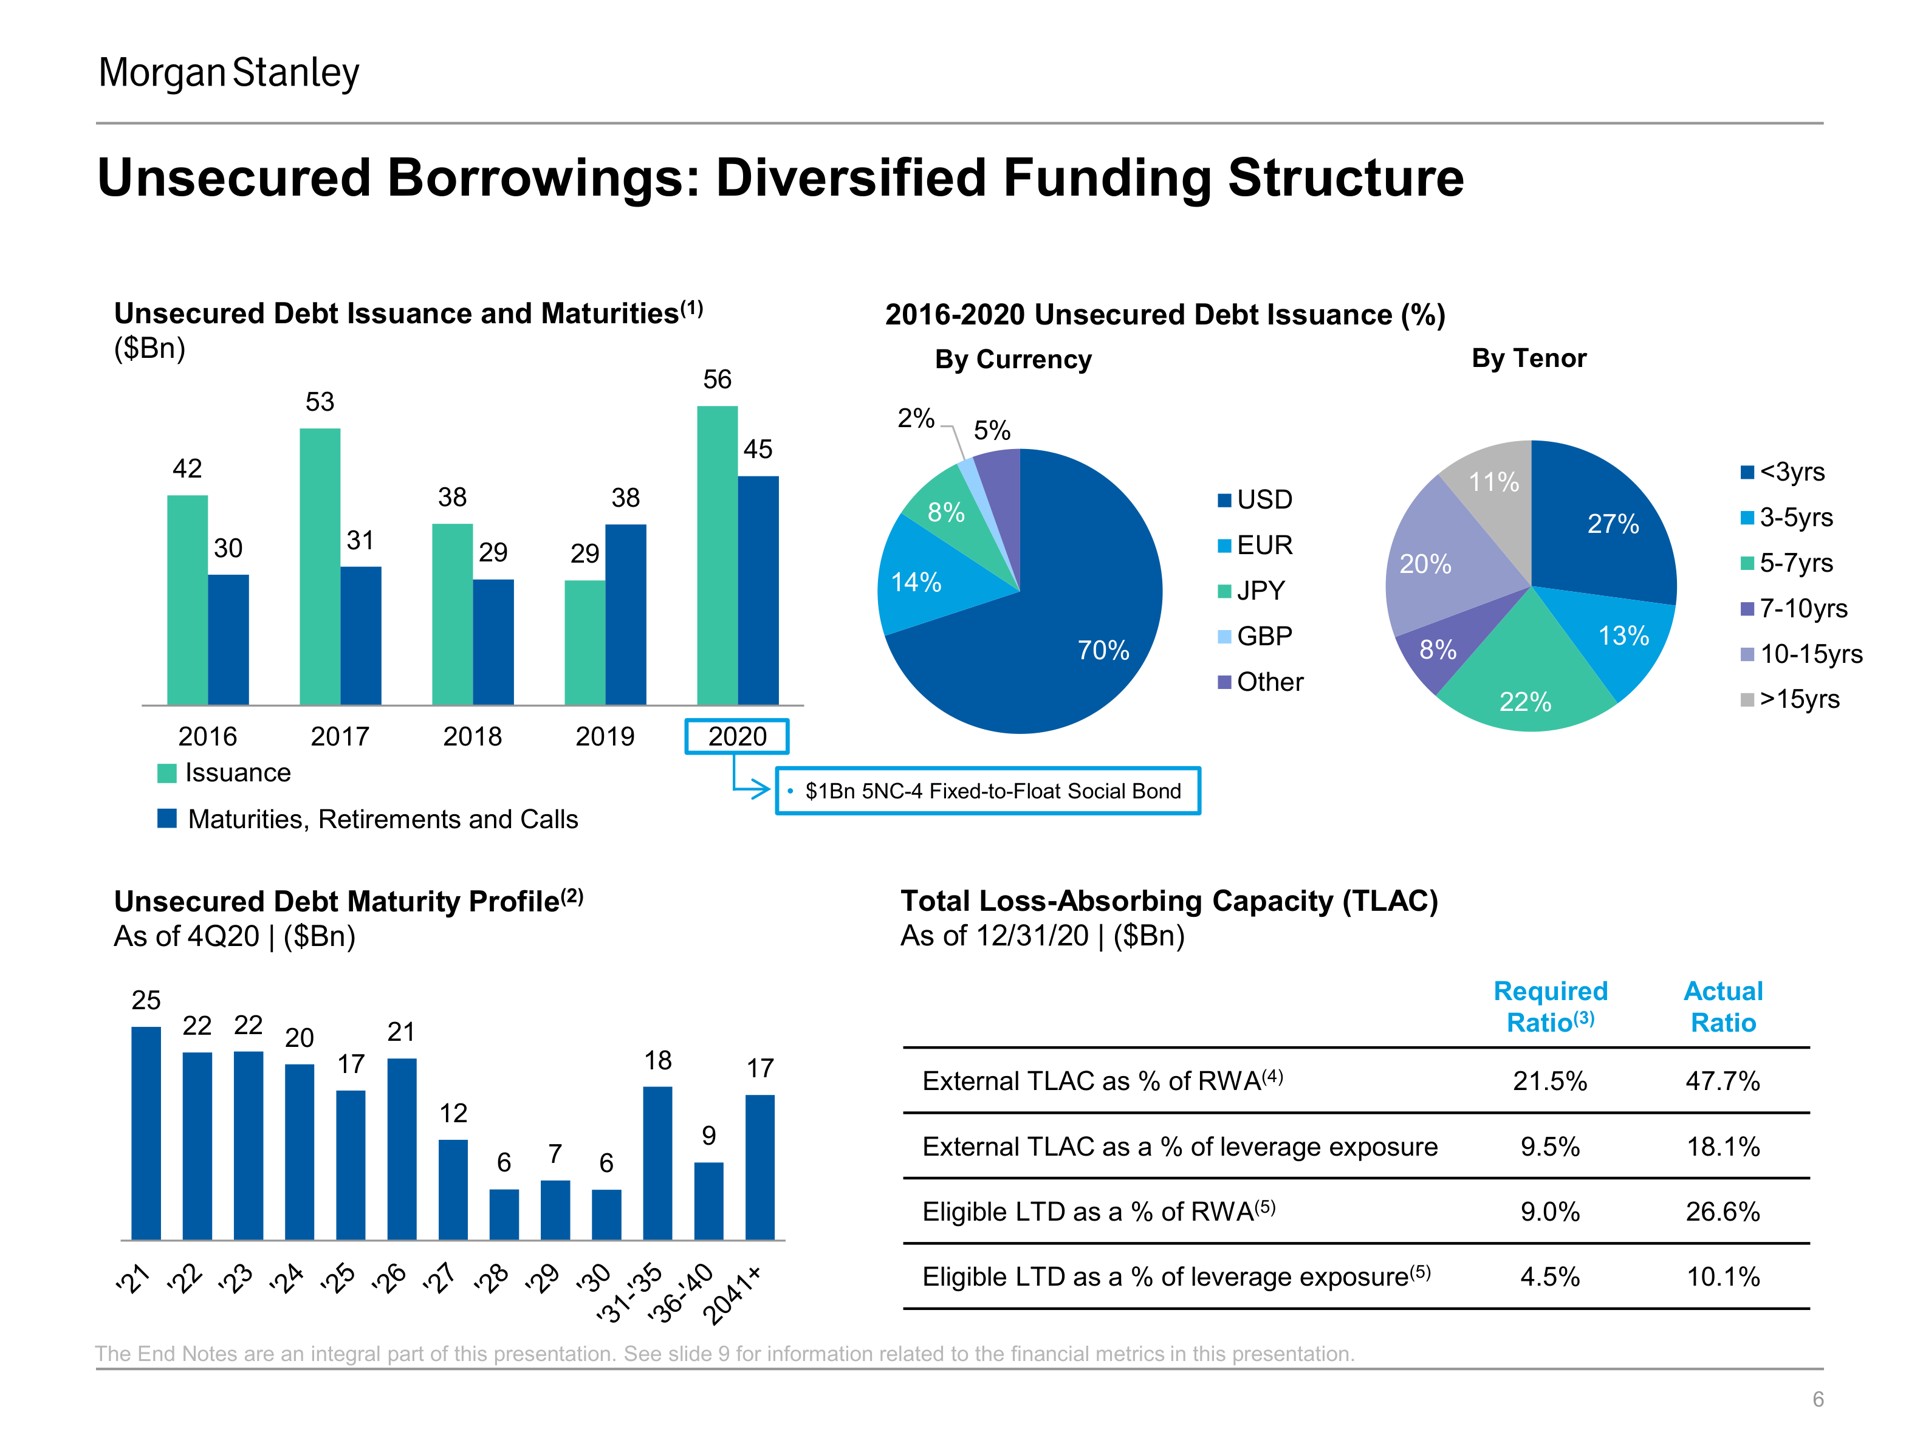 unsecured borrowings diversified funding structure | Morgan Stanley